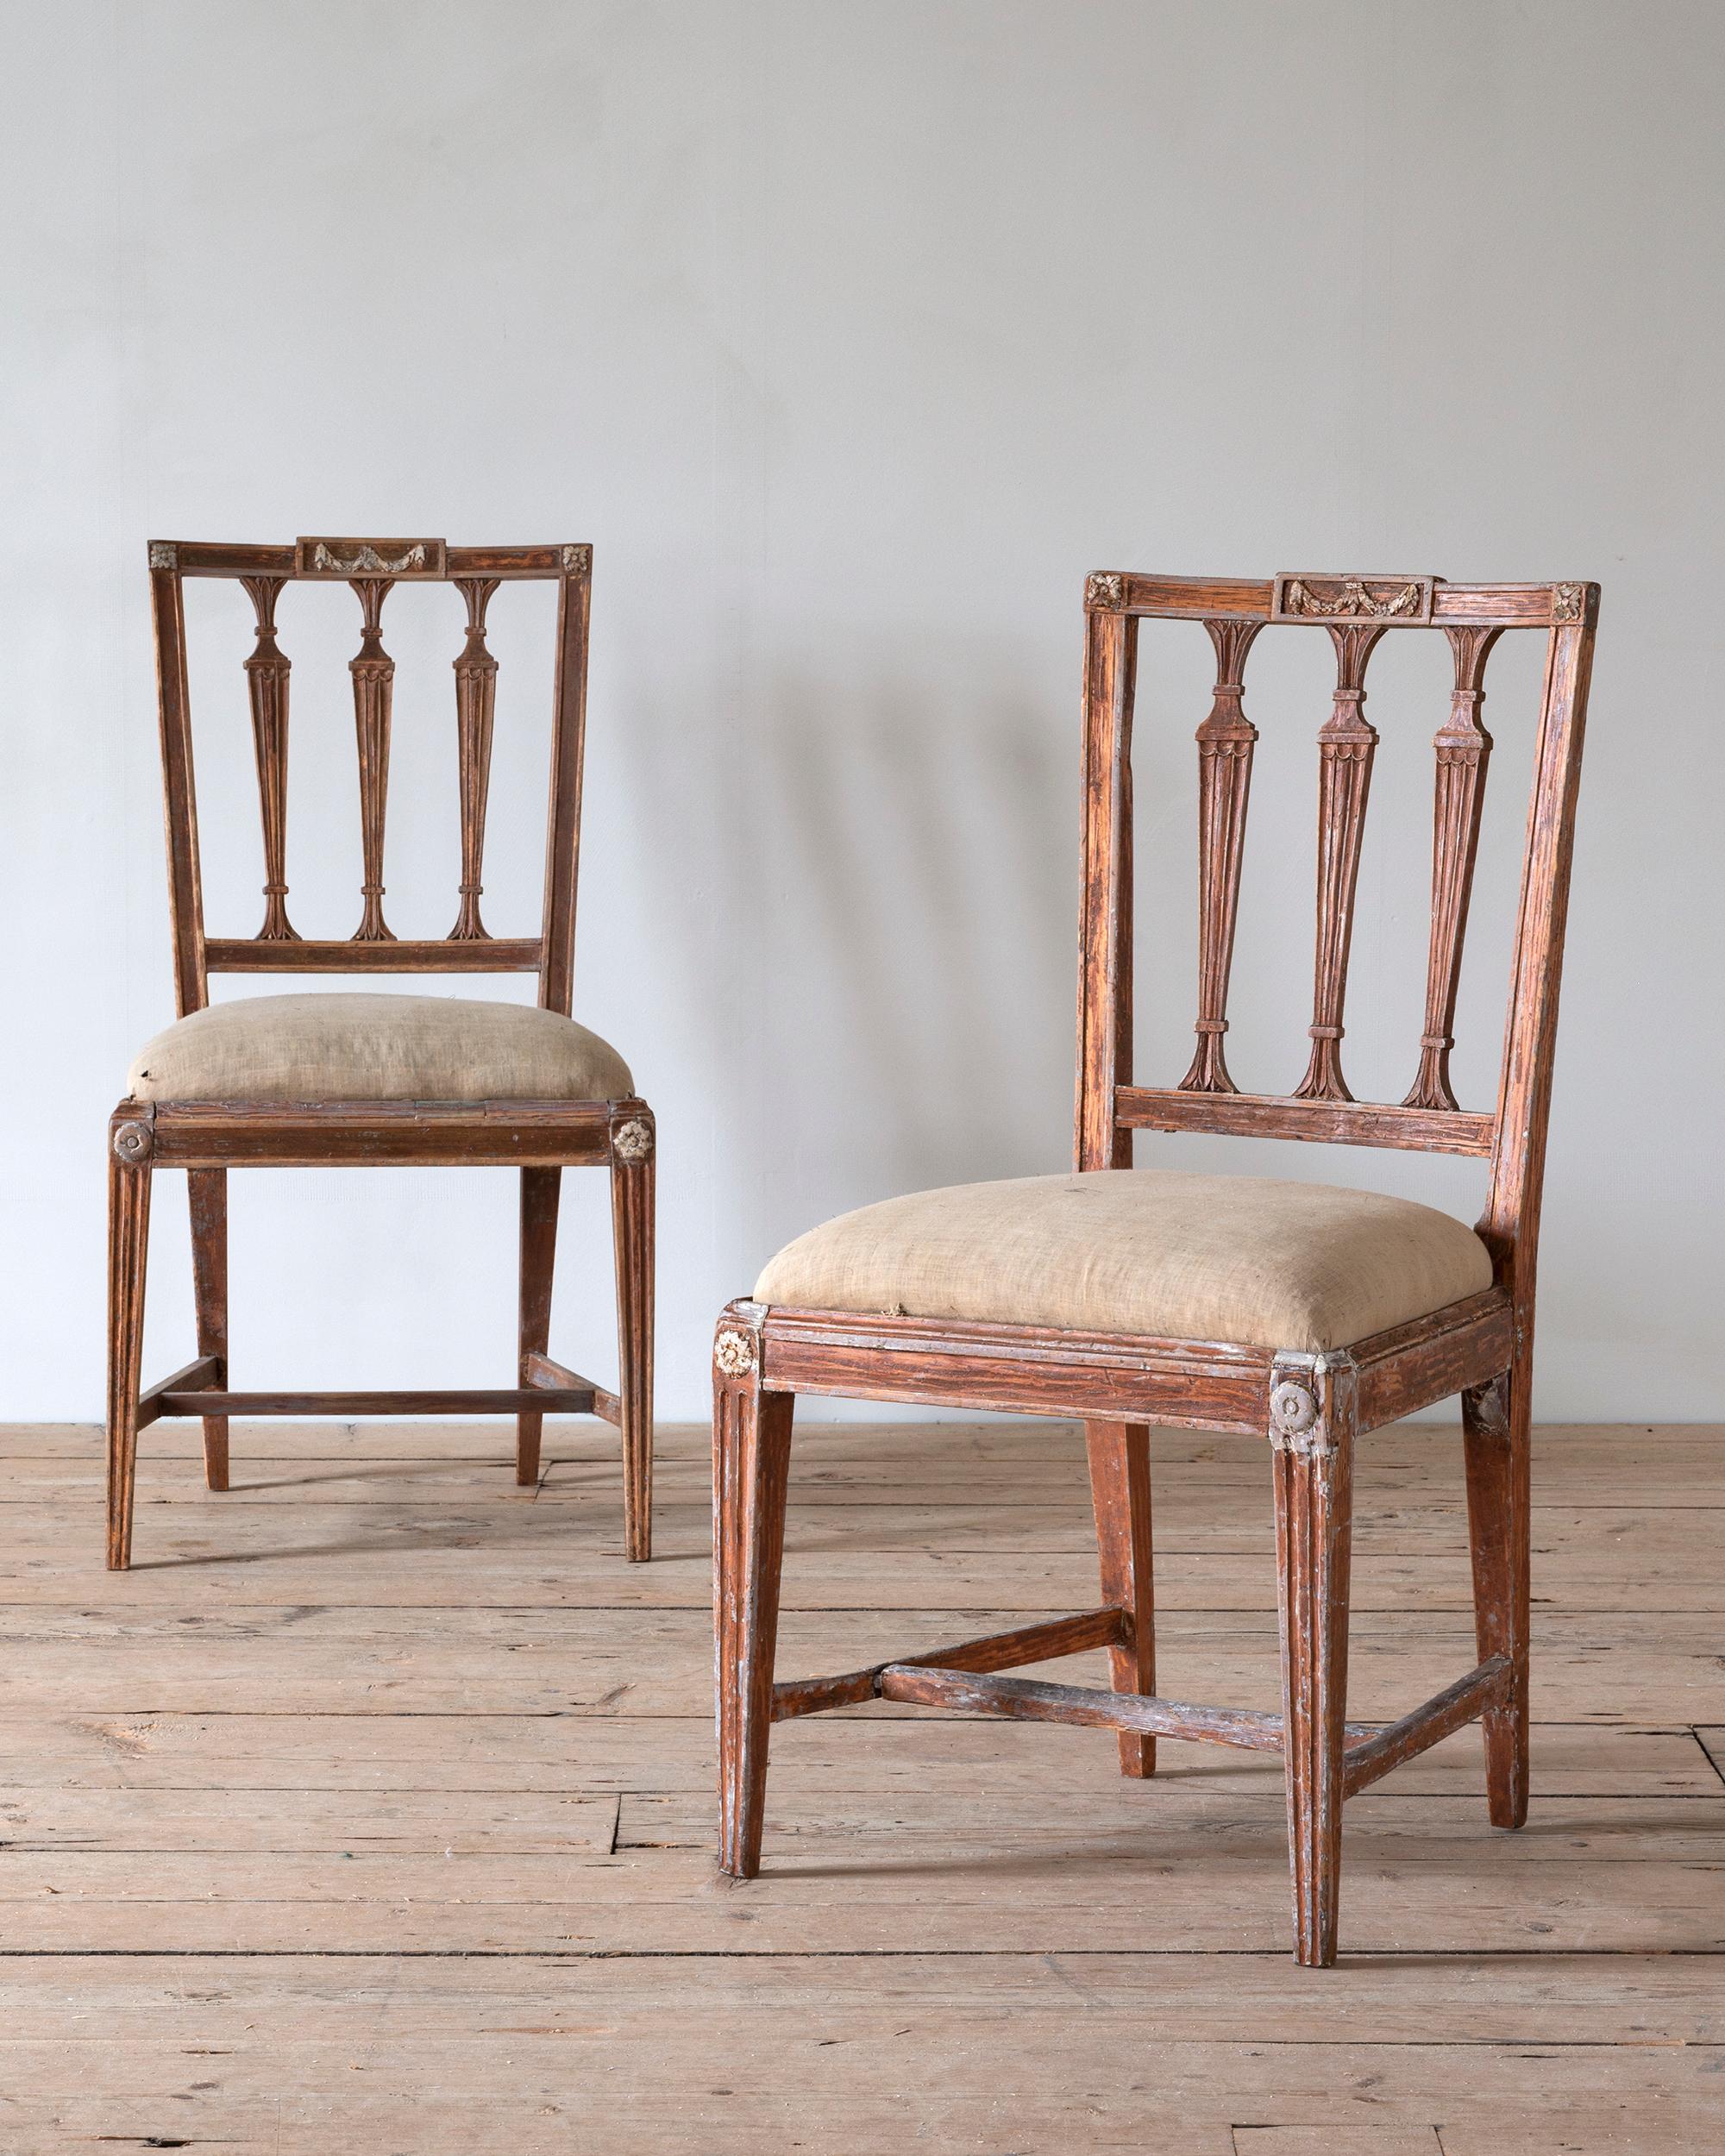 Fine pair of Swedish early 19th century late Gustavian chairs in their original finish by master chair maker Melchior Lundberg (active in Stockholm 1795-1834) . Ca 1810 Stockholm, Sweden. 

